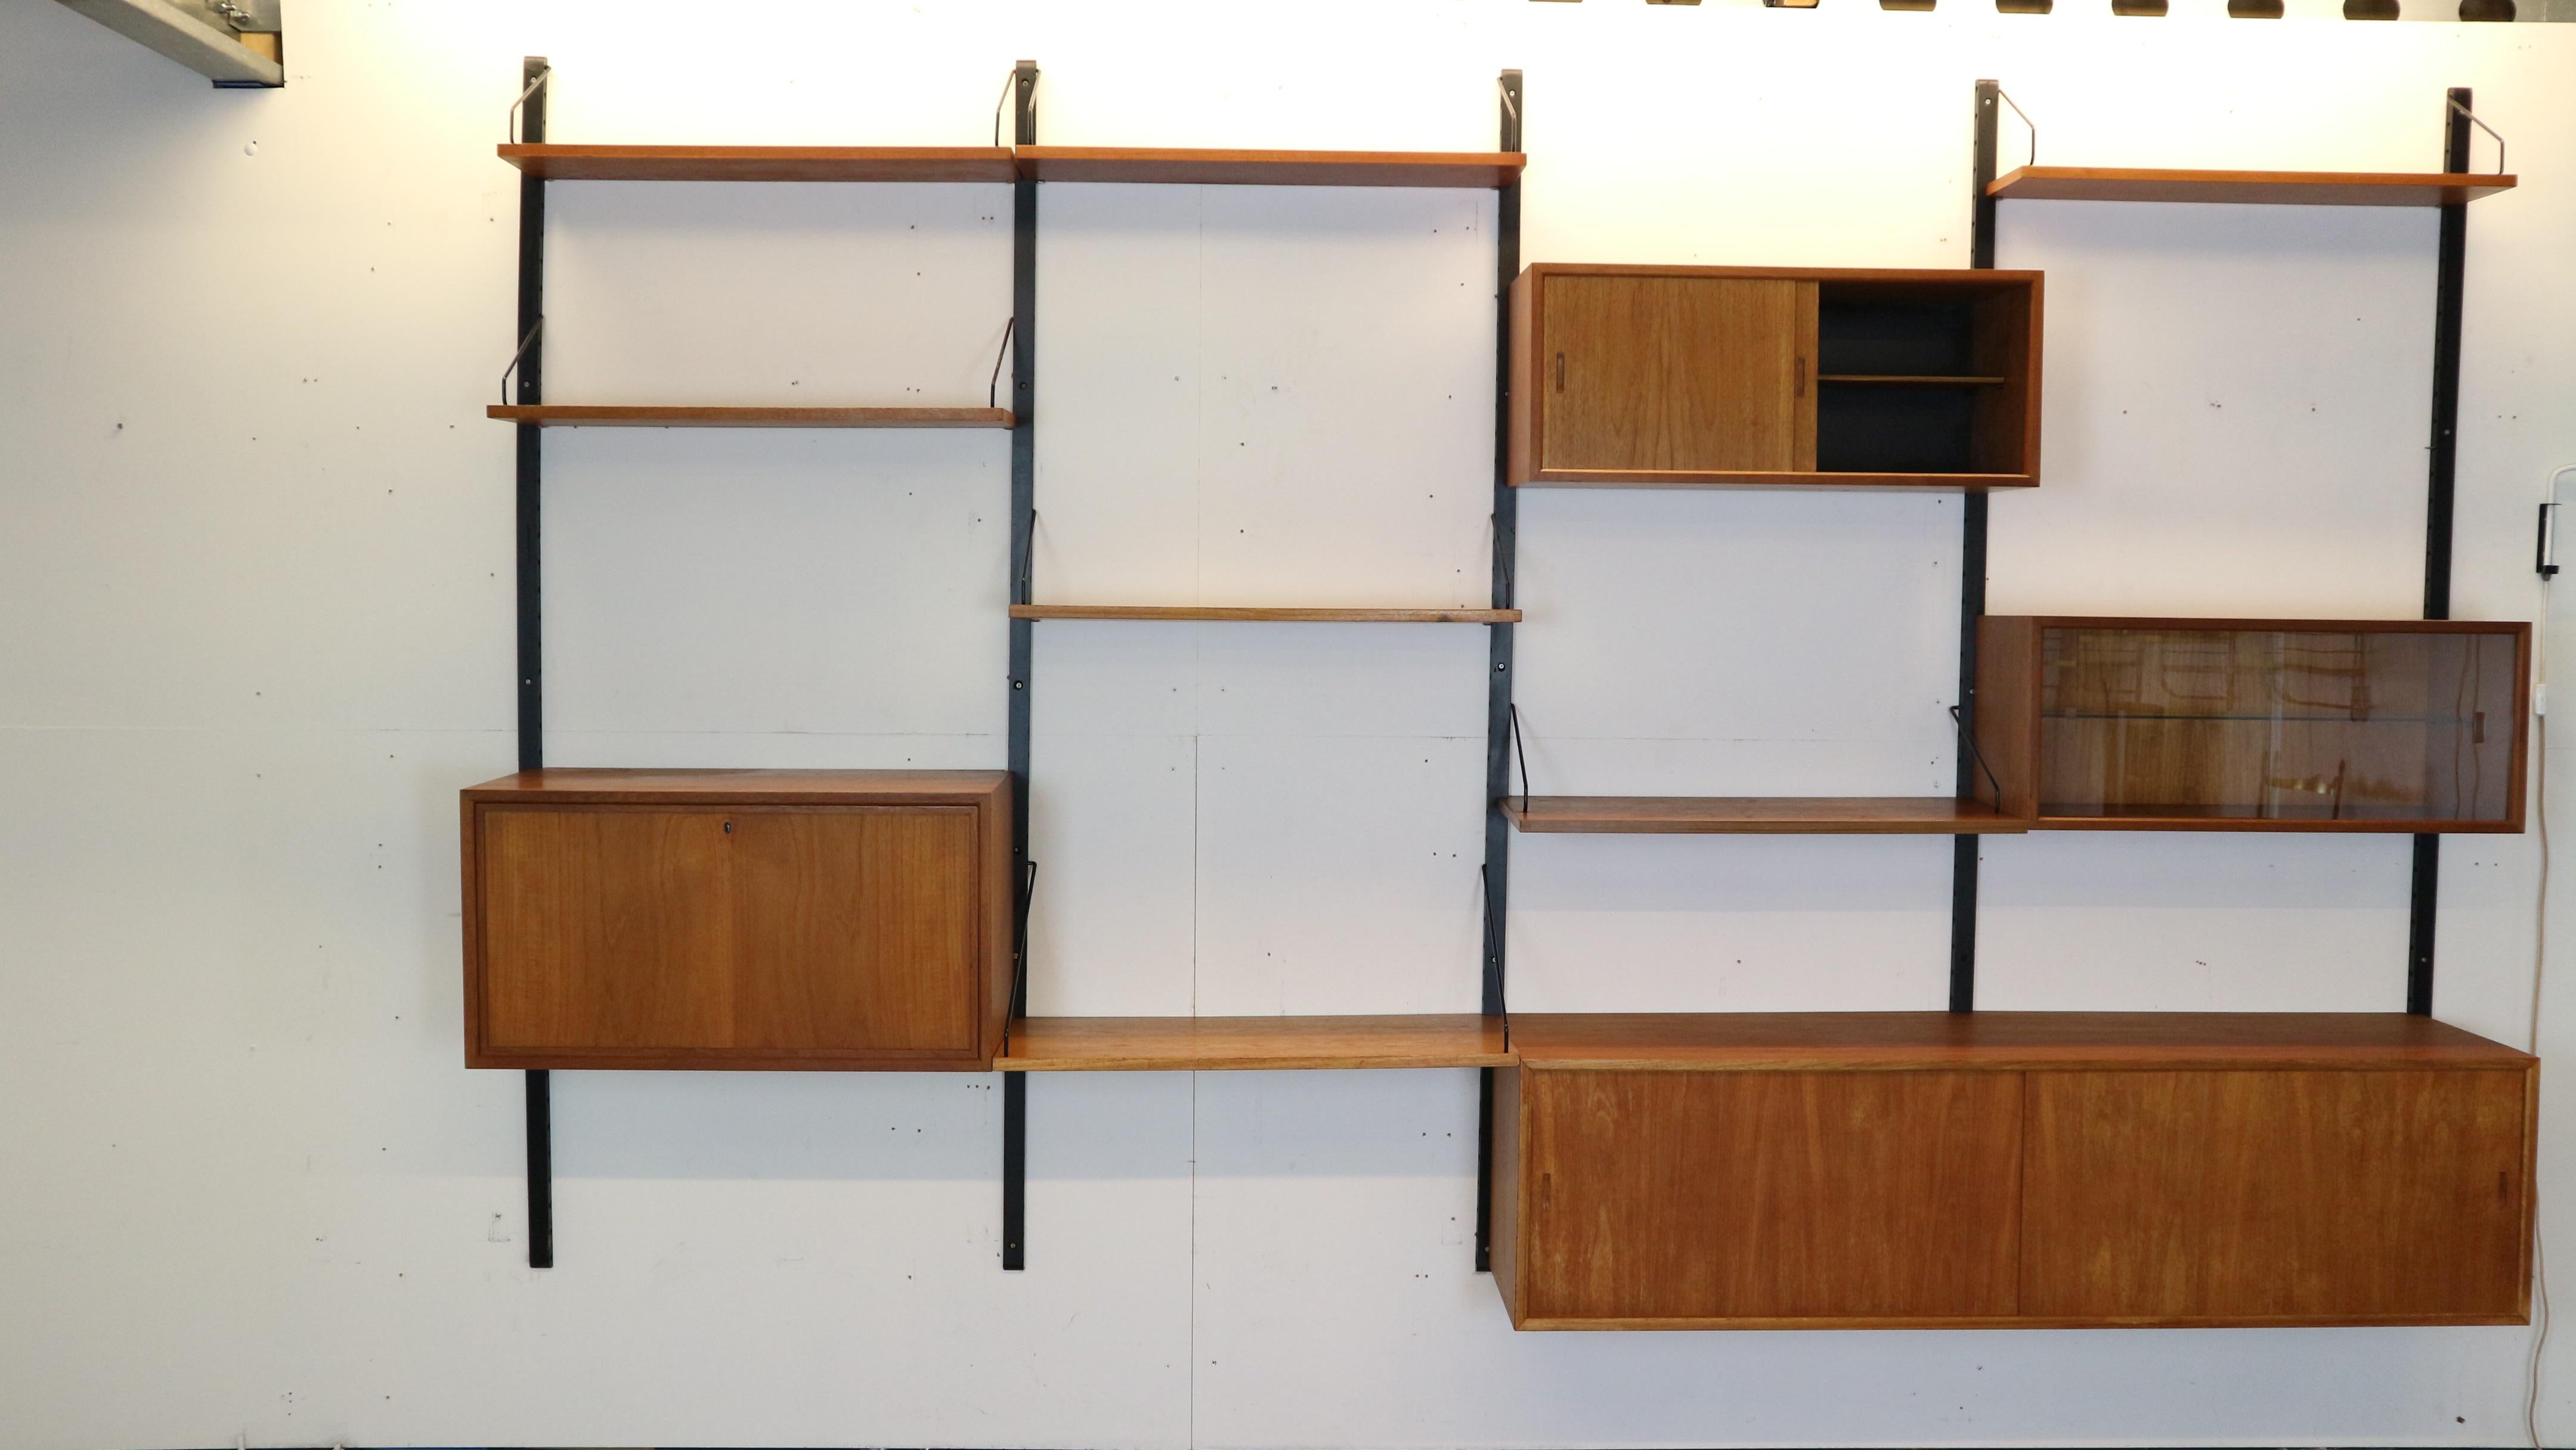 Extra large Danish design wall system or shelving unit by Poul Cadovius for Royal System, designed in Denmark in 1950s.
When you ask someone to think of a European midcentury wall unit, most will probably think of Poul Cadovius and his shelving